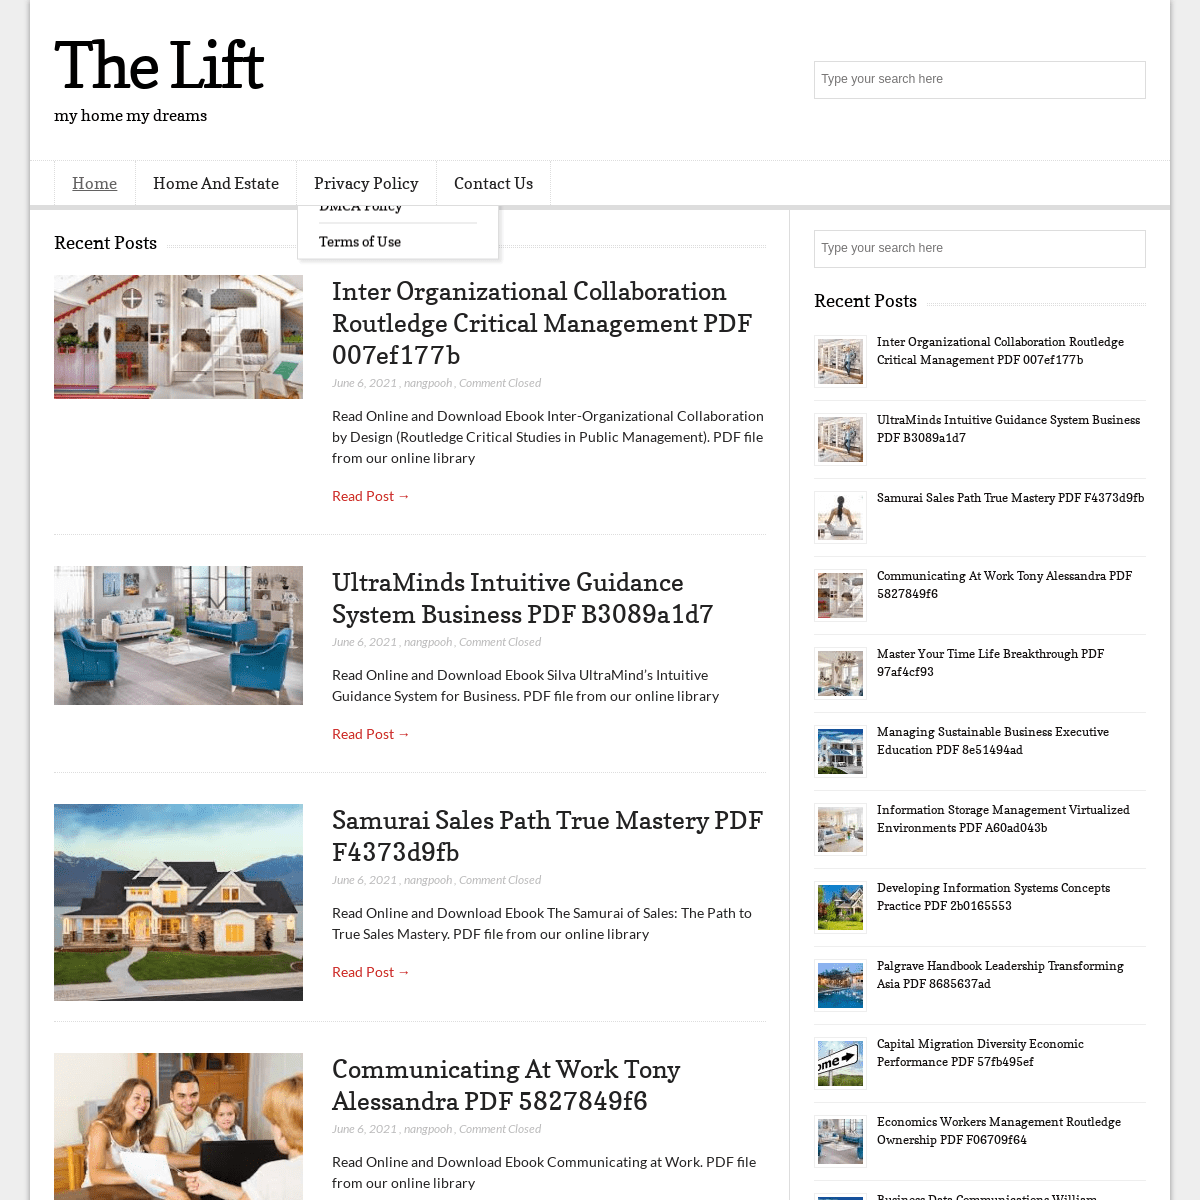 A complete backup of https://thelift.site